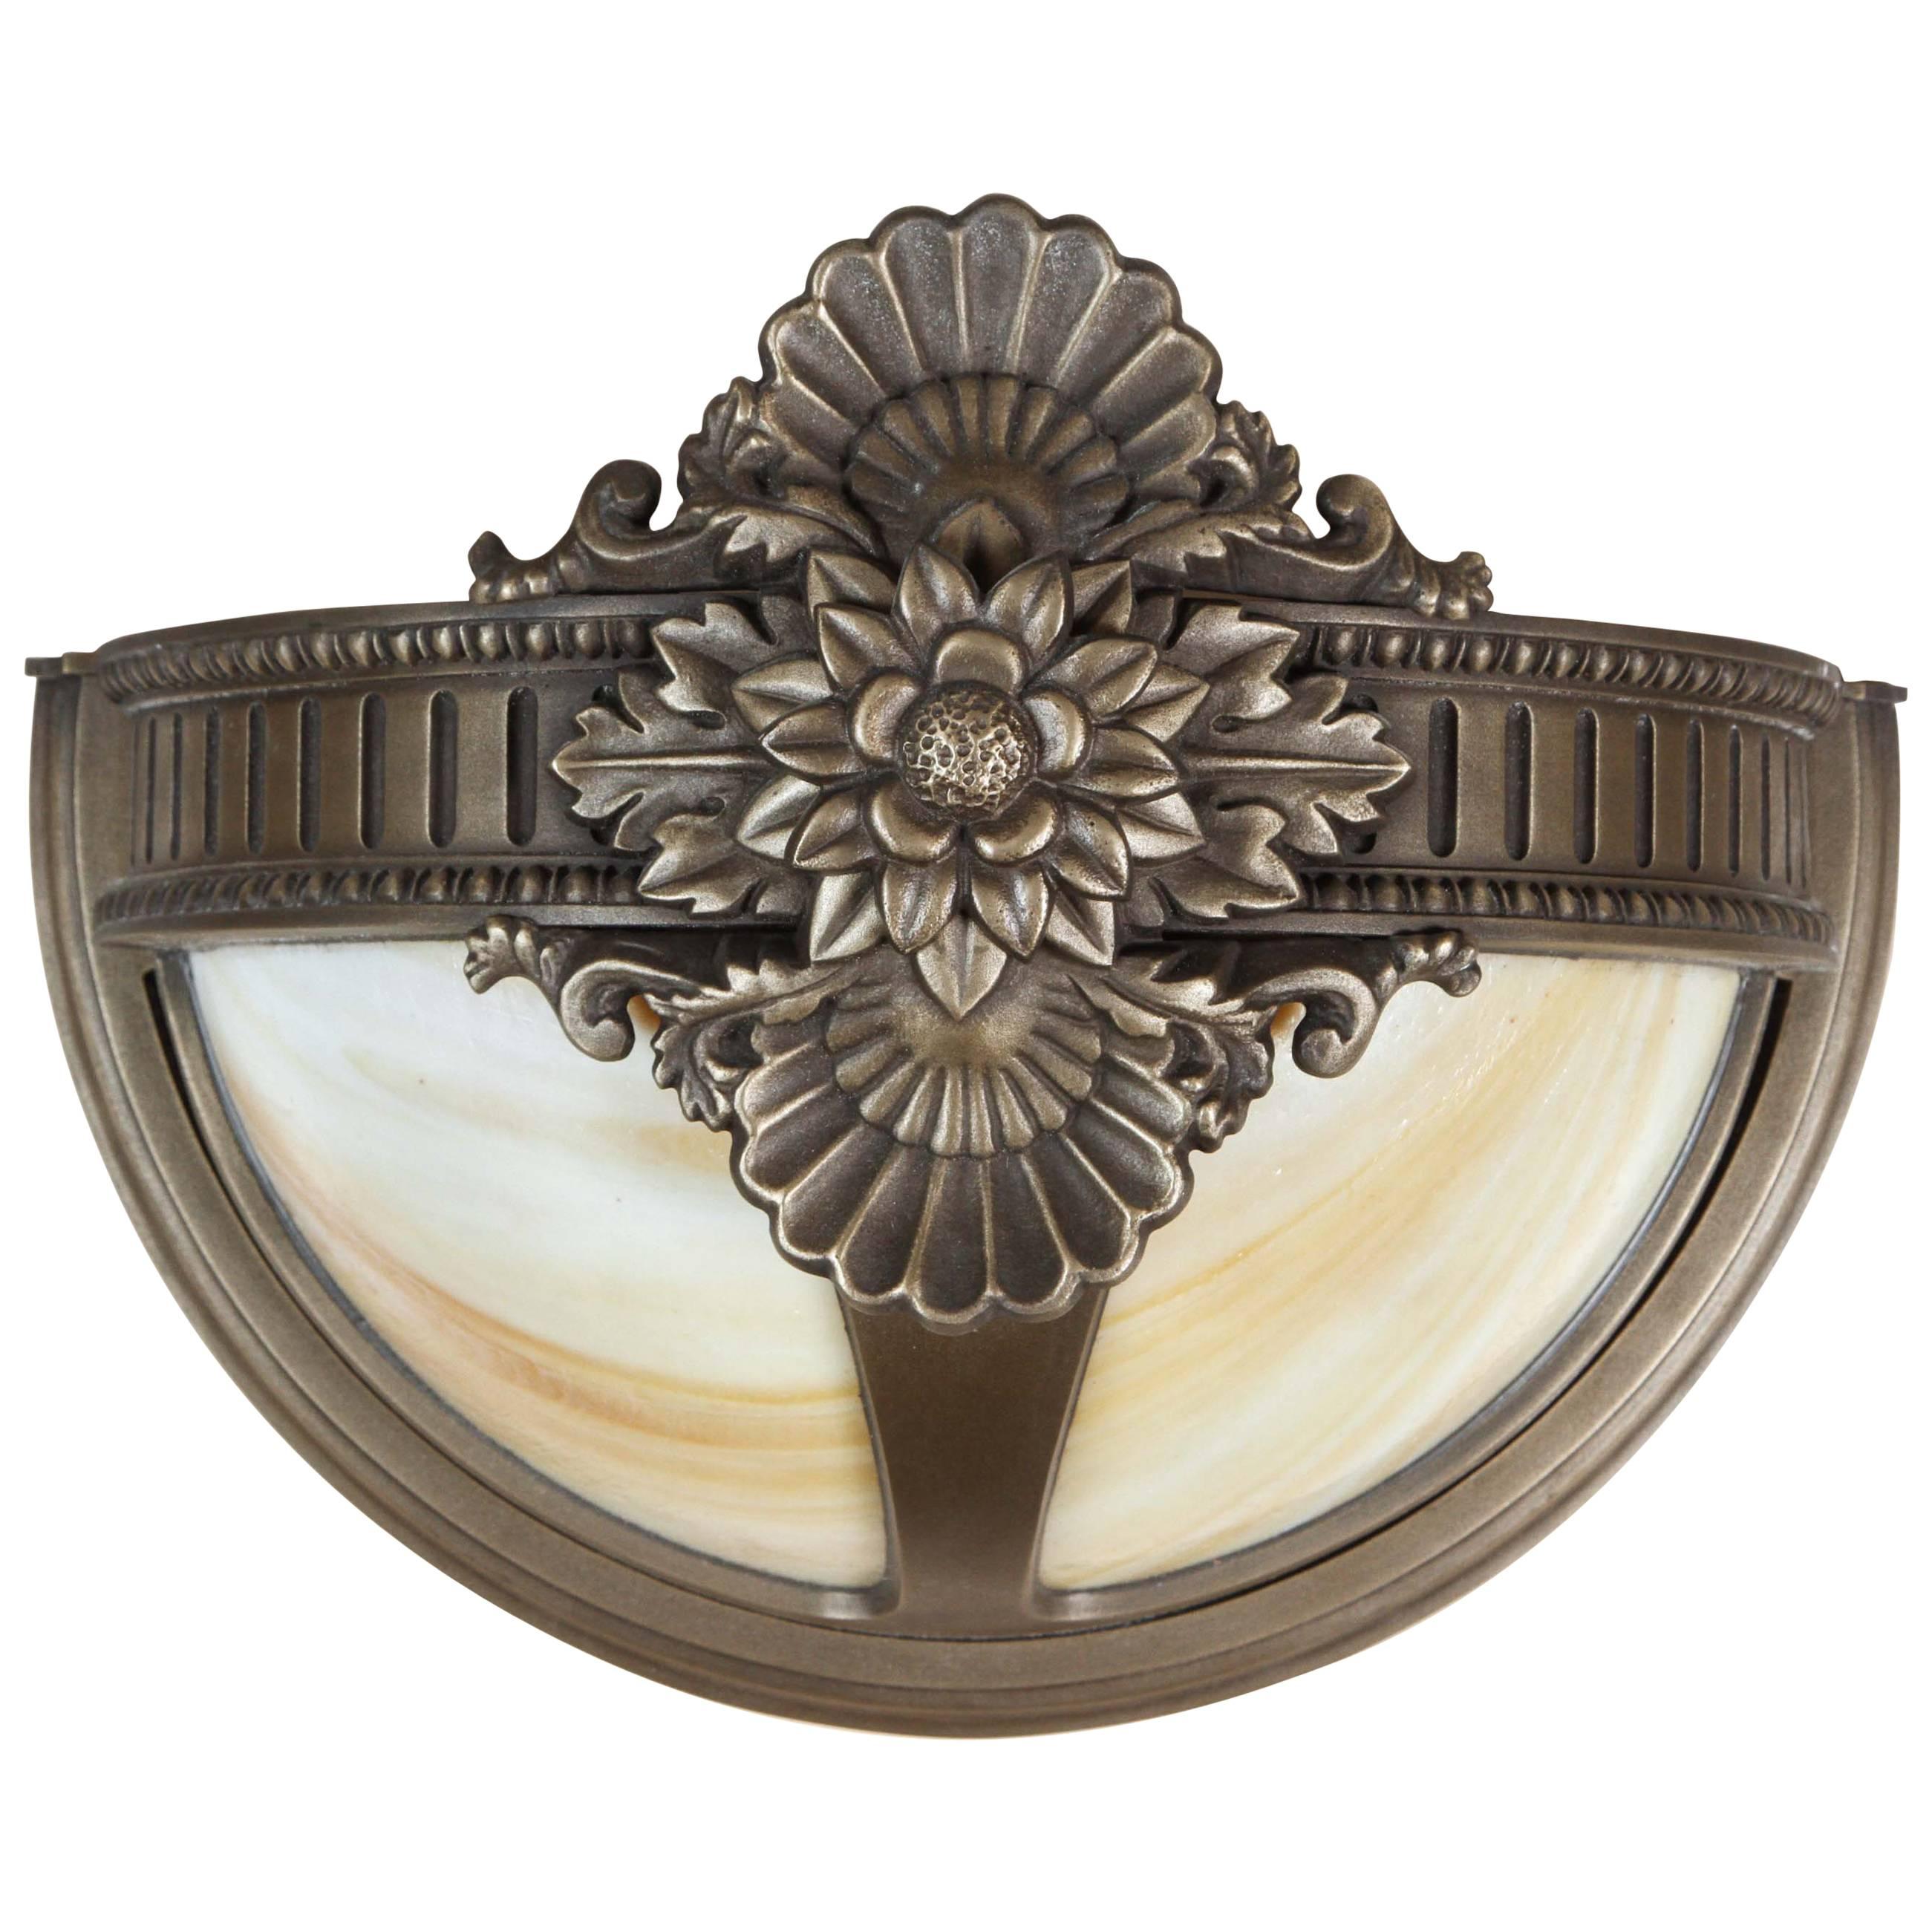 Bronze Wall Sconce with Slag Glass in a Floral Design